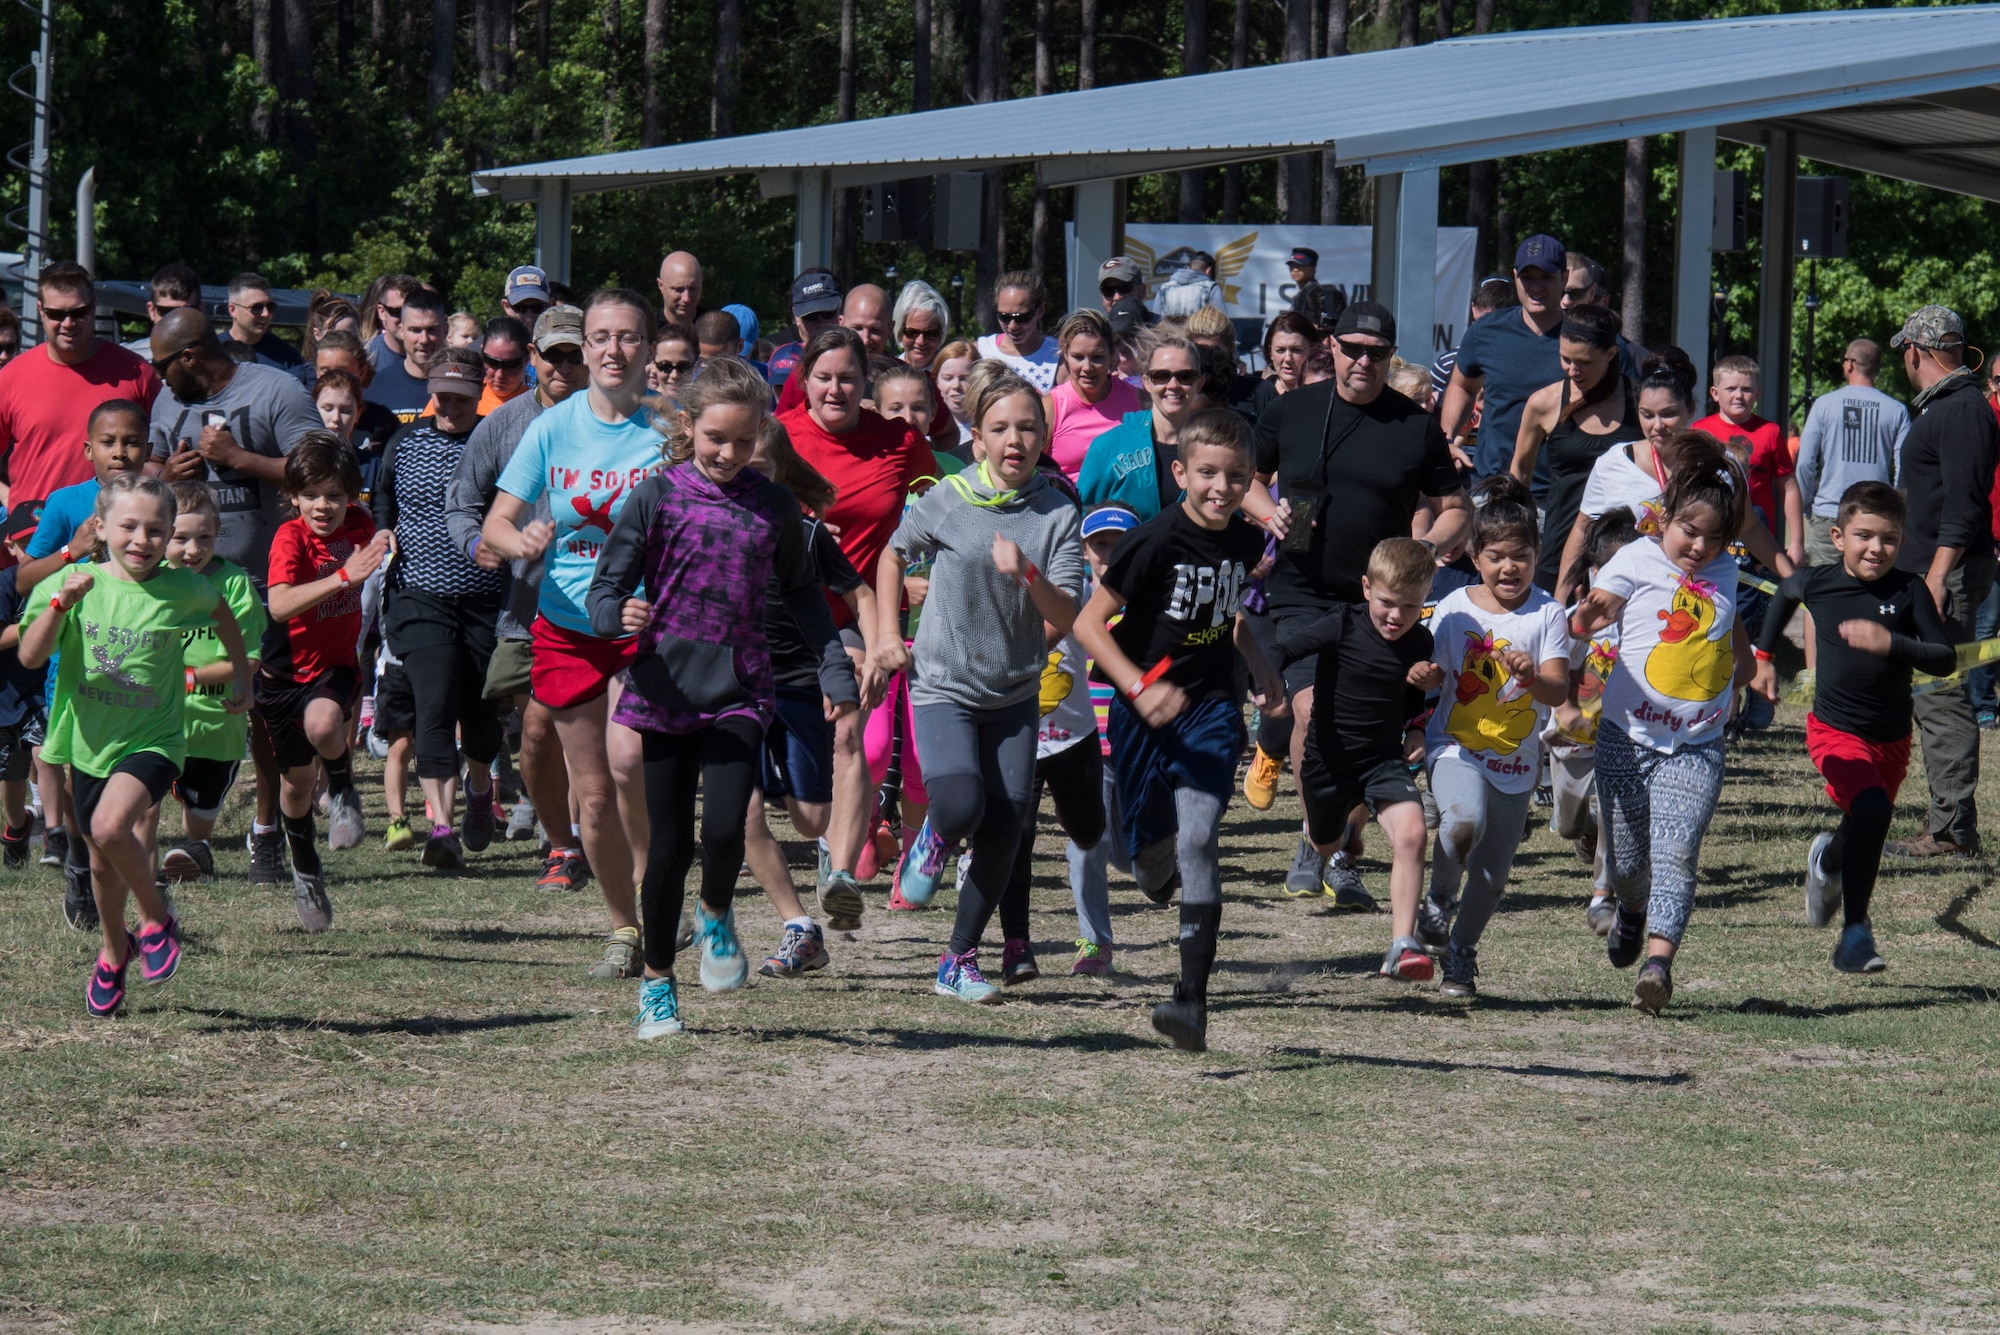 Children take-off from the starting line to begin the Child’s Moody Mud Run, May 6, 2017, in Ray City, Ga. The Fourth Annual Moody Mud consisted of both adult and child course that challenged more than 600 participants with obstacles over 4.2 miles. (U.S. Air Force photo by Staff Sgt. Eric Summers Jr.)